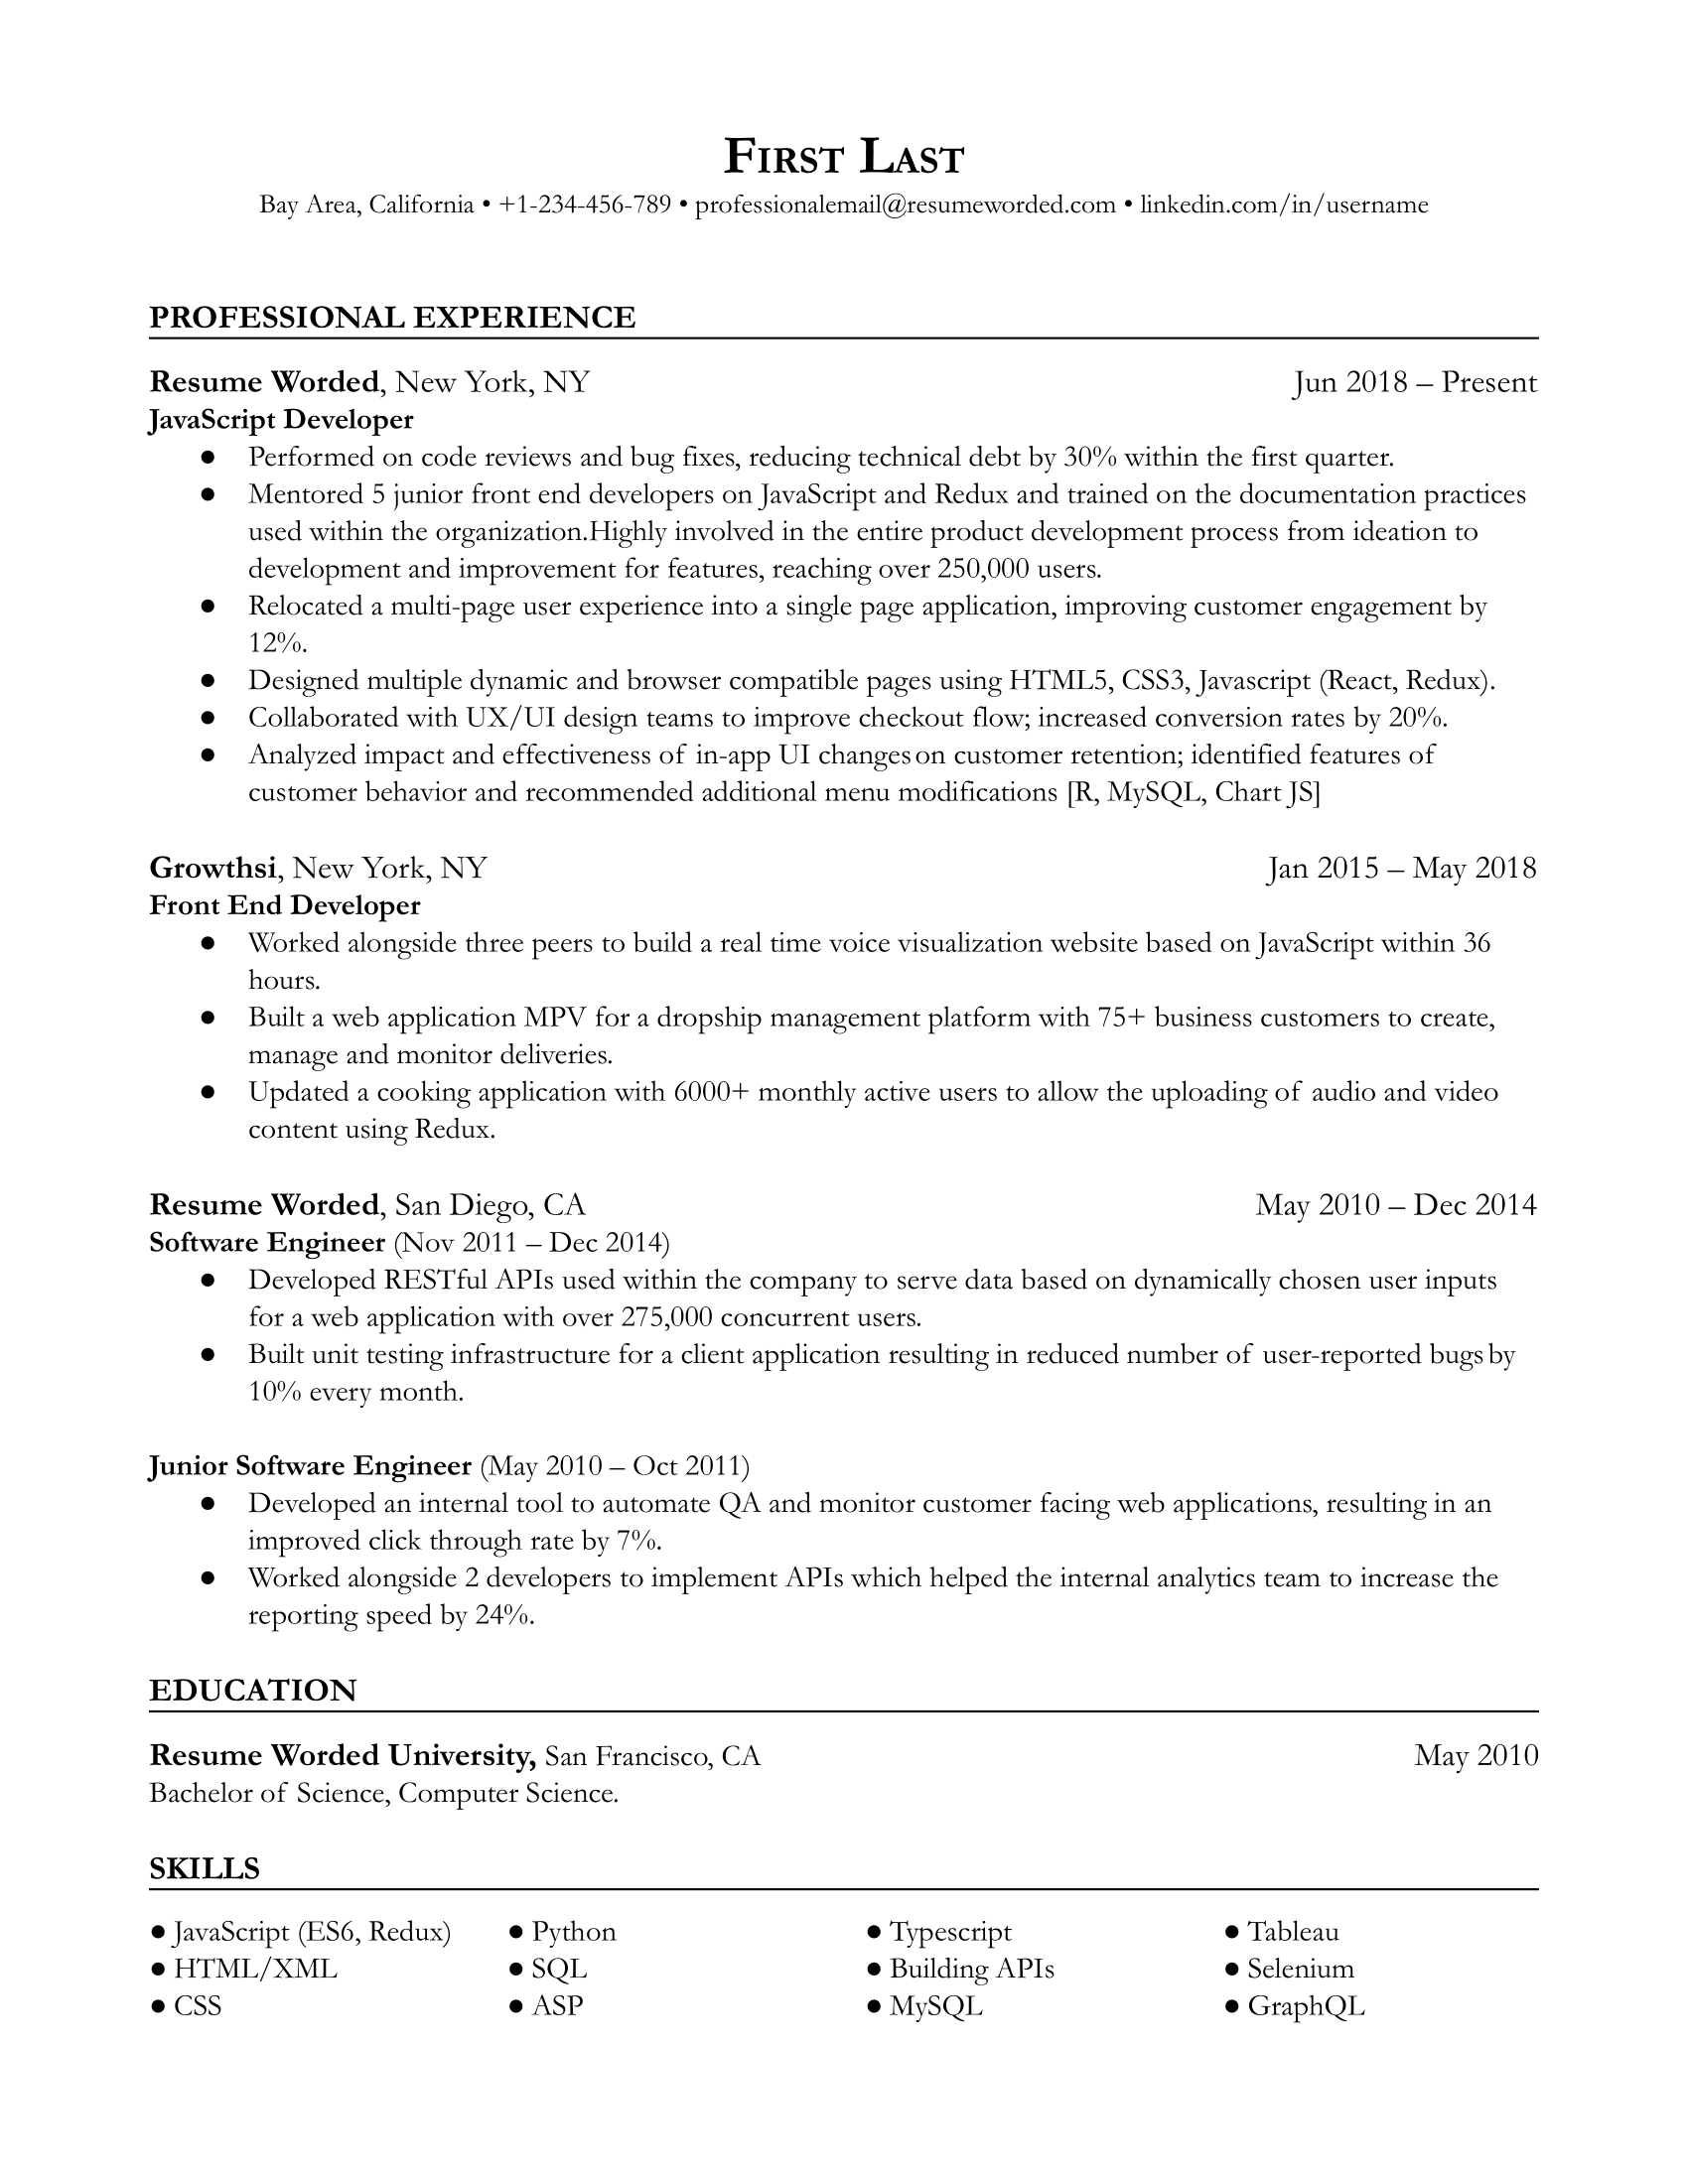 JavaScript Developer (Front-End) resume showcasing technical skills, frameworks expertise, and collaborative projects.